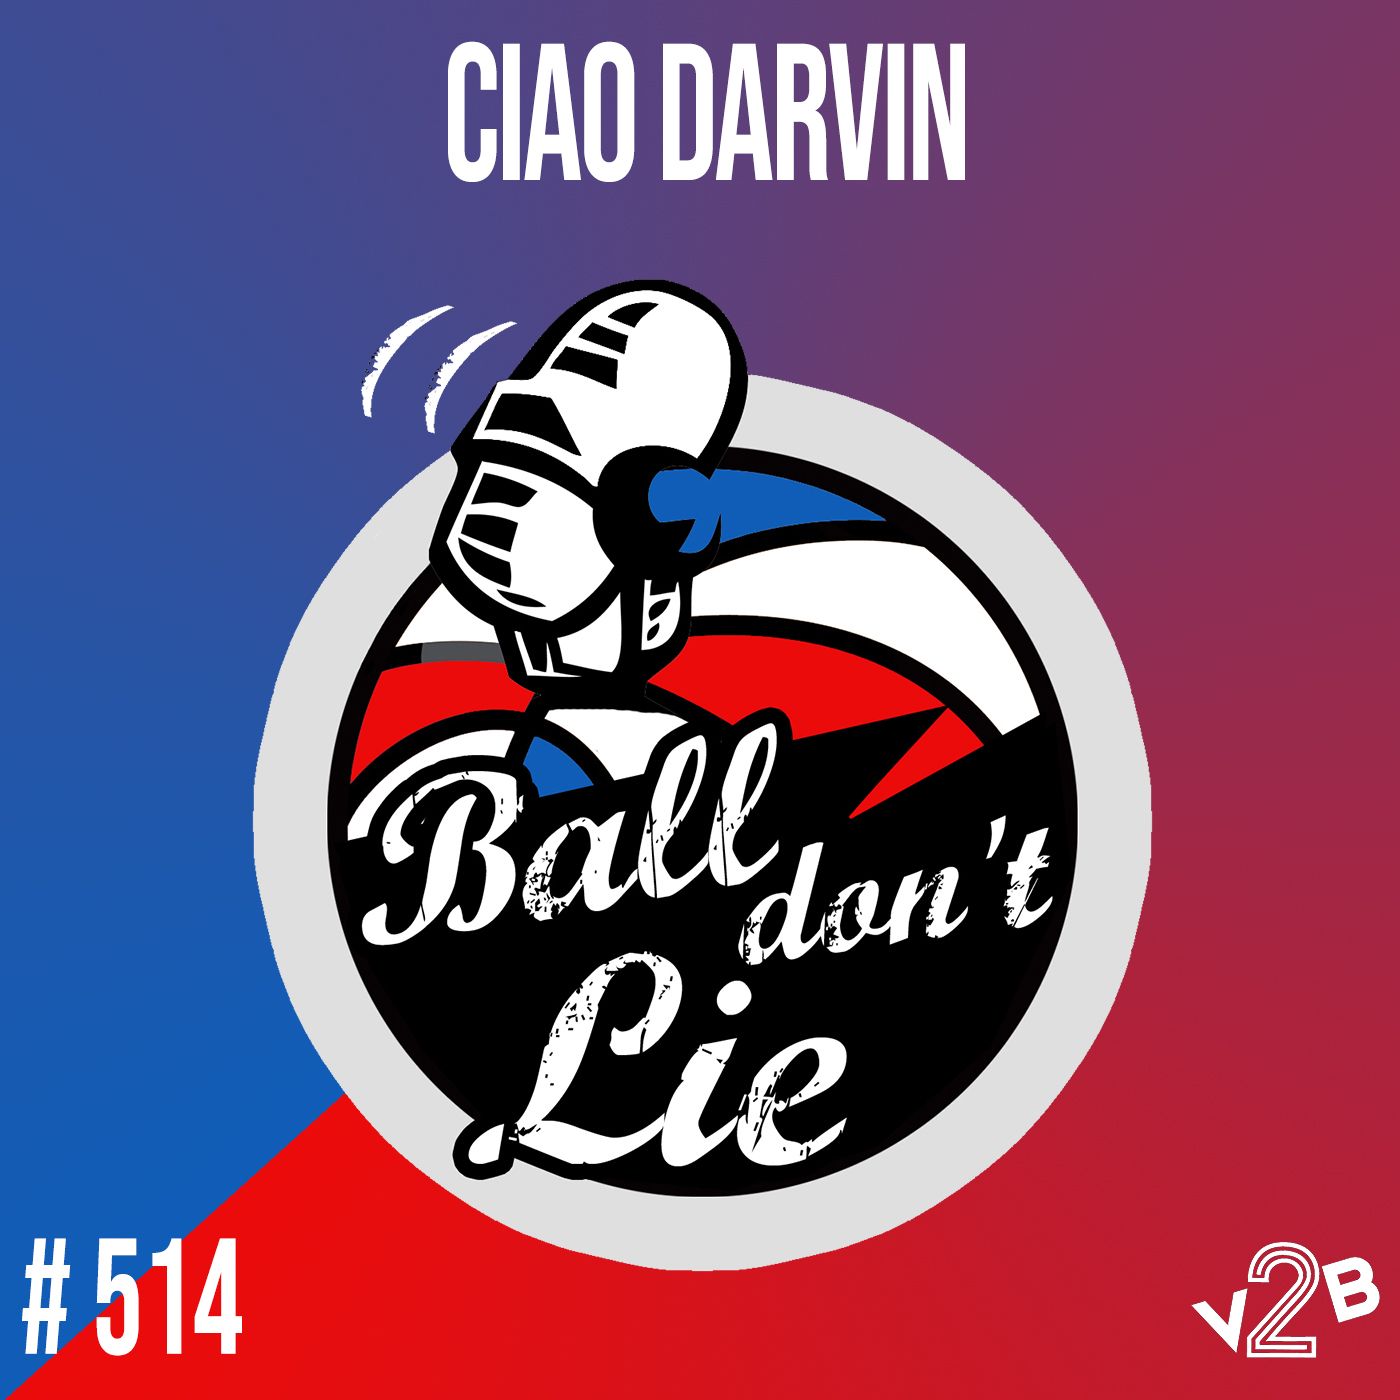 Ciao Darvin (14x11)